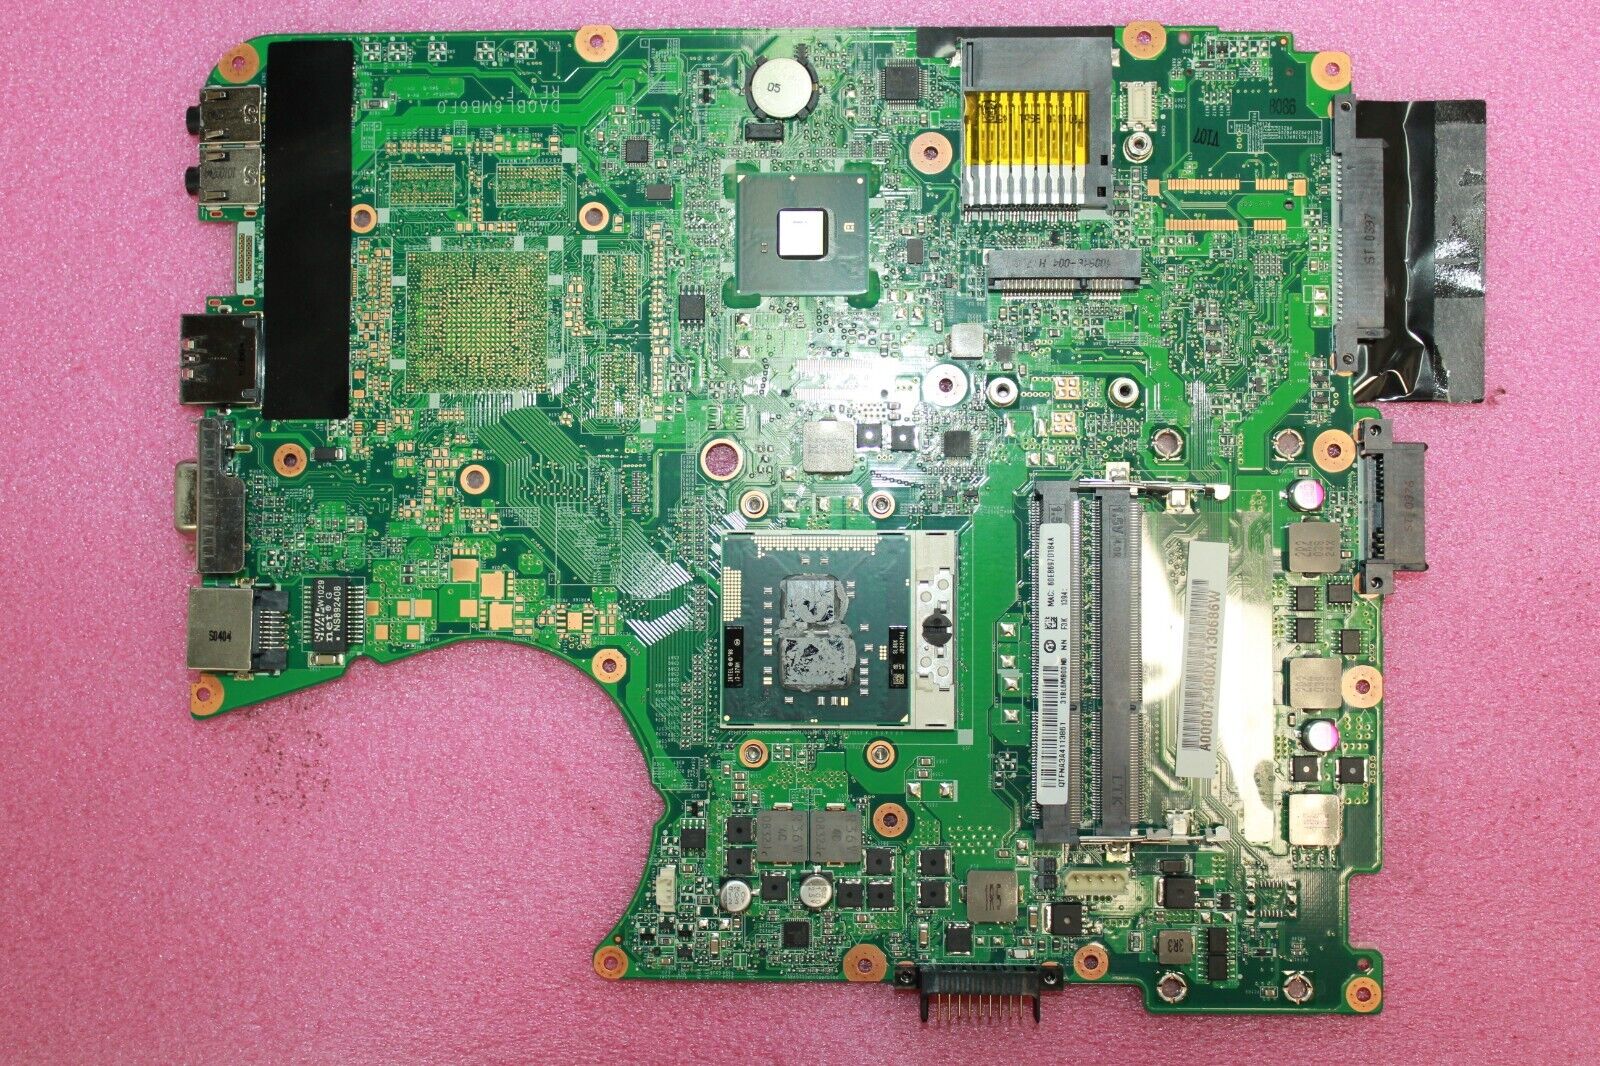 Toshiba Satellite L655 Motherboard with Intel i3-370M SLBUK CPU A000075480